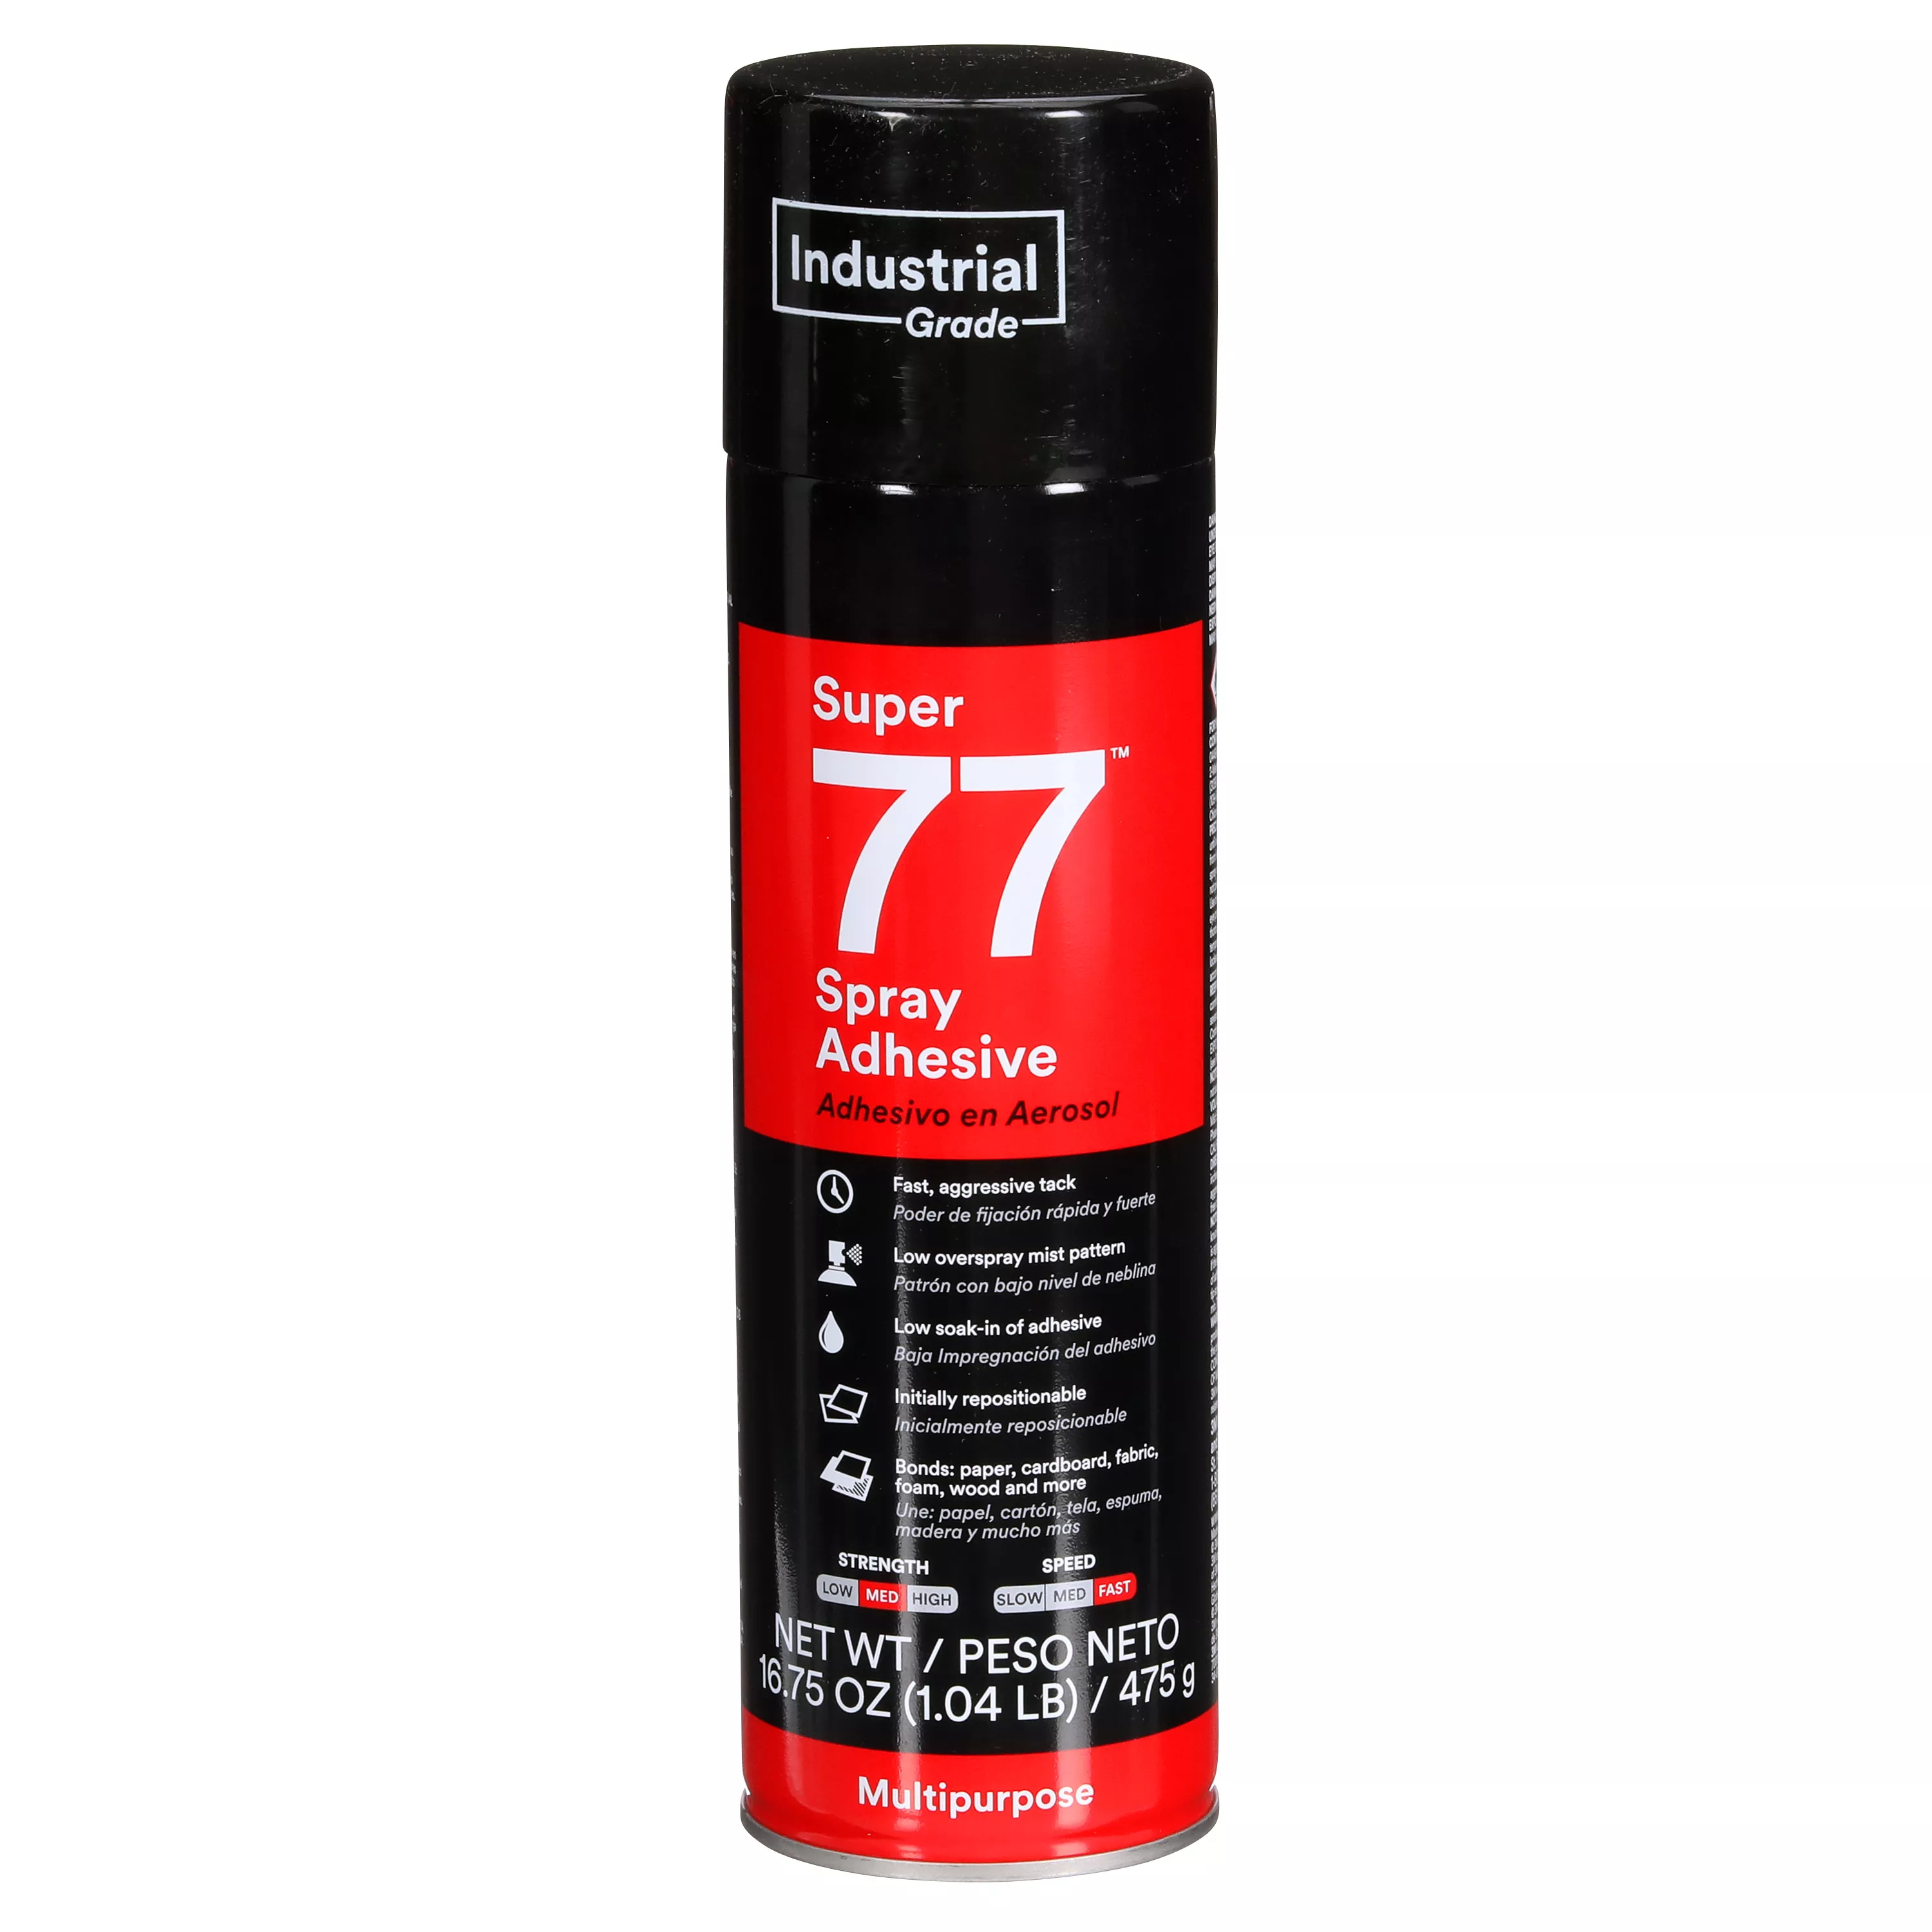 3M™ Super 77™ Multipurpose Spray Adhesive, Clear, 16 fl oz Can (Net Wt
13.44 oz), 12/Case, NOT FOR SALE IN CA AND OTHER STATES